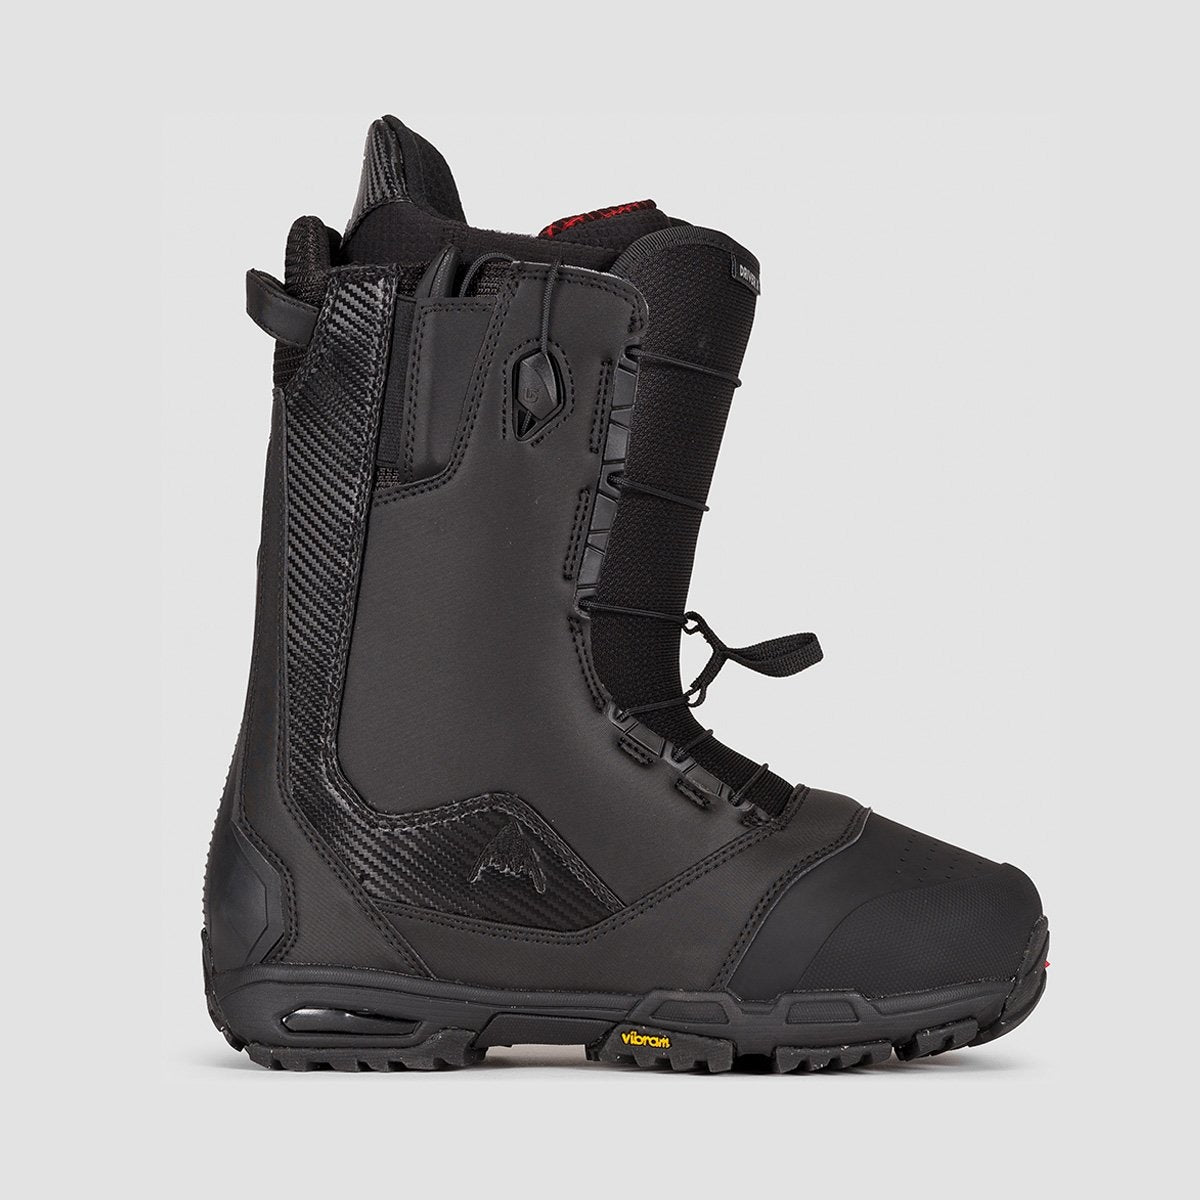 X Snowboard Boots Black - rollersnakes.co.uk – Rollersnakes